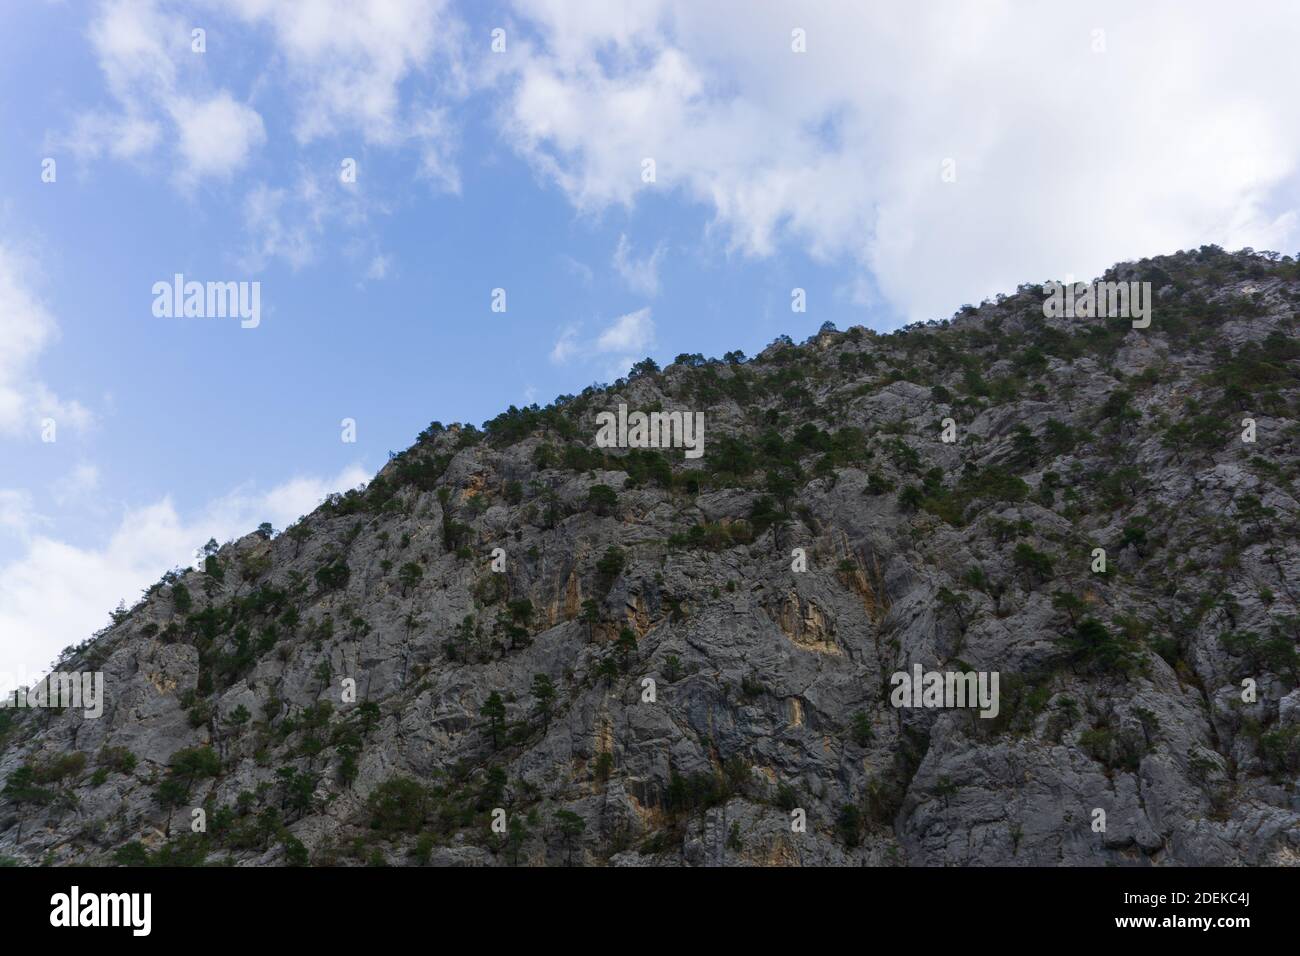 view of rocks on a cloudy day Stock Photo